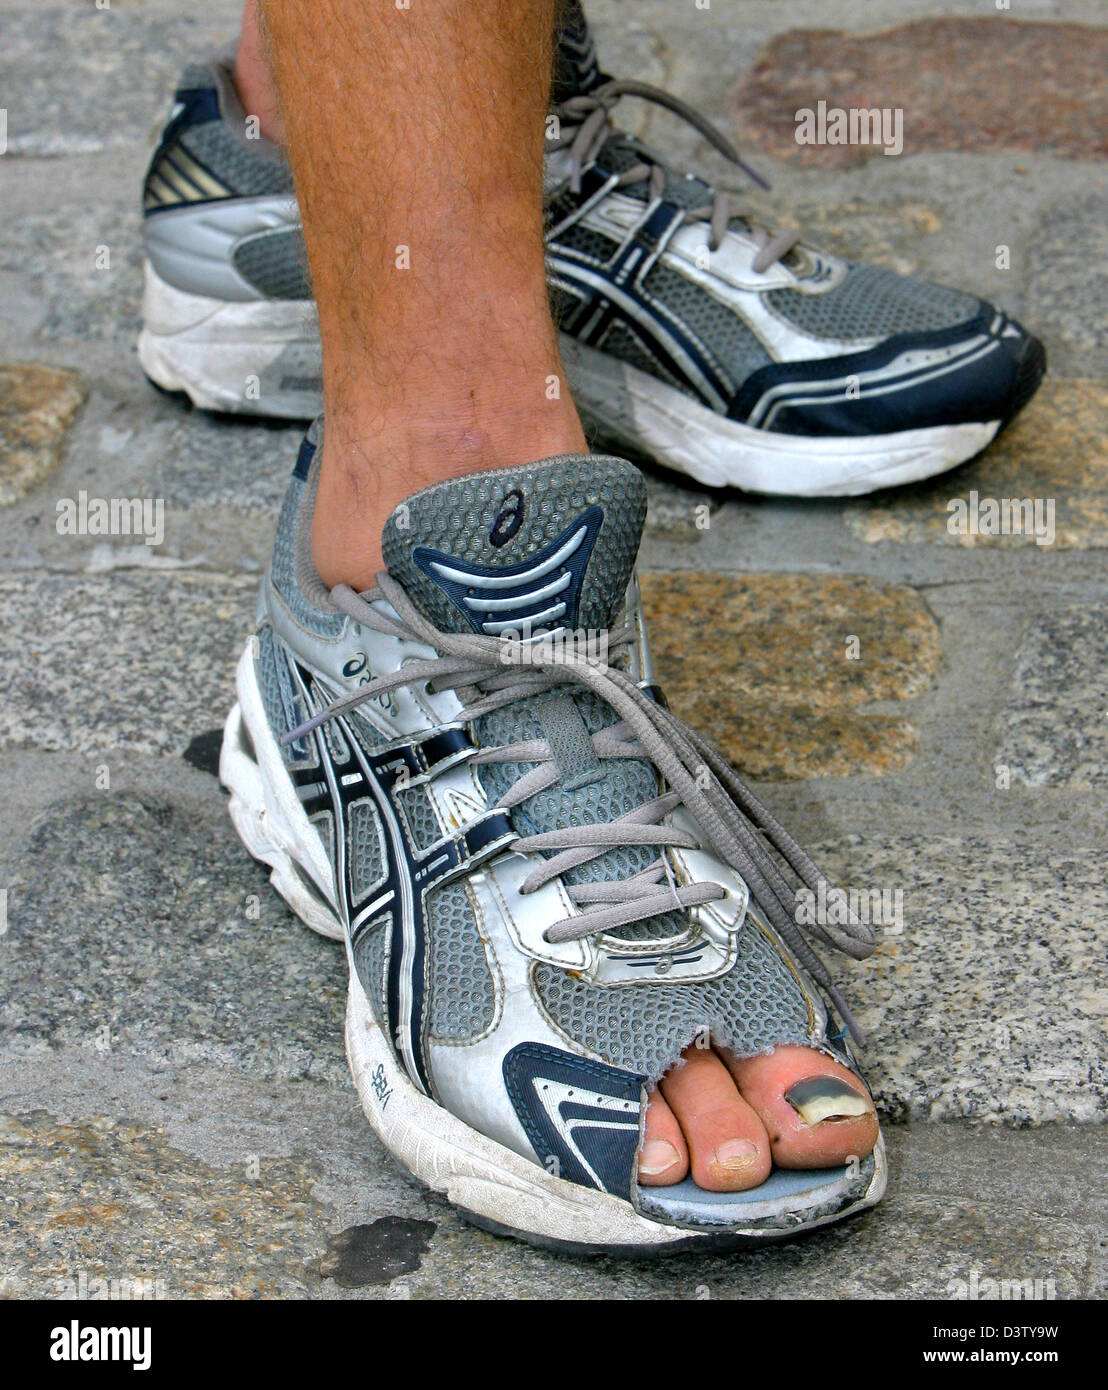 (dpa file) - The feet of German extreme runner Ronald Prokein pictured after his 5,000 kilometres from Istanbul, Turkey to Nordkap, Norway in Rostock, Germany, 25 August 2006. Prokein started on 20 May 2006 through Turkey, Bulgaria, Serbia, Hungaria, Austria, Czech Republic, Germany, Denmark, Sweden, Finland and arrived in Norway on 21 August. He made 60 to 110 kilometres per day.  Stock Photo